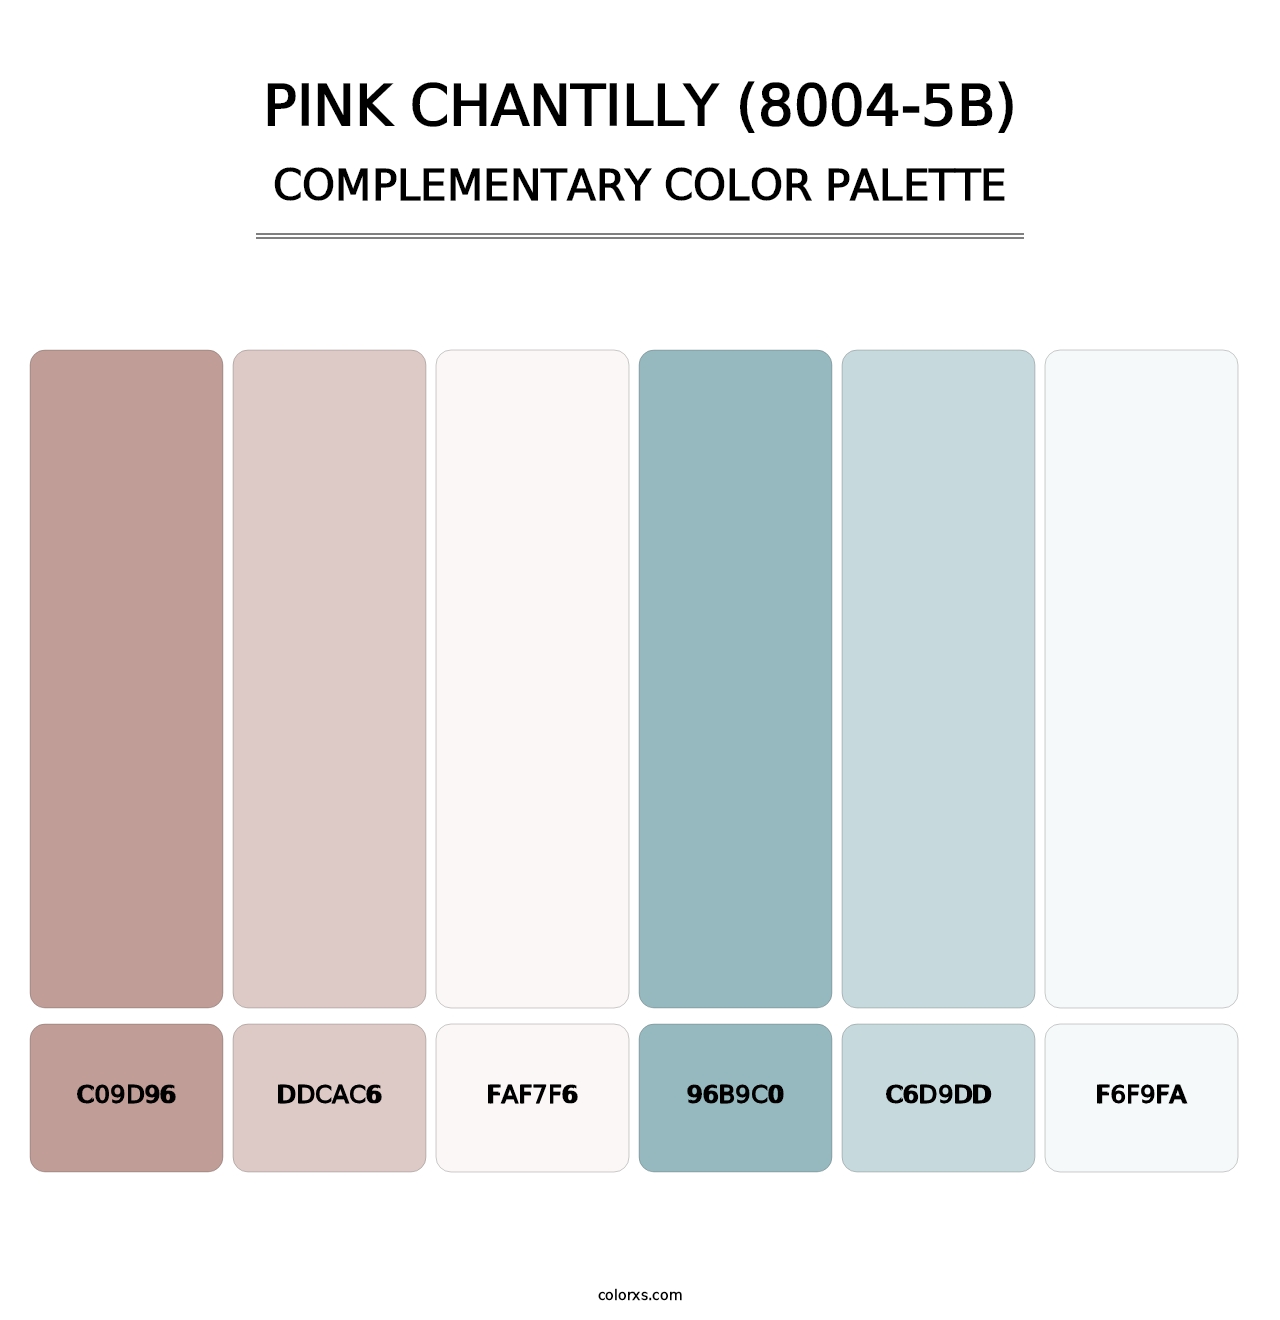 Pink Chantilly (8004-5B) - Complementary Color Palette